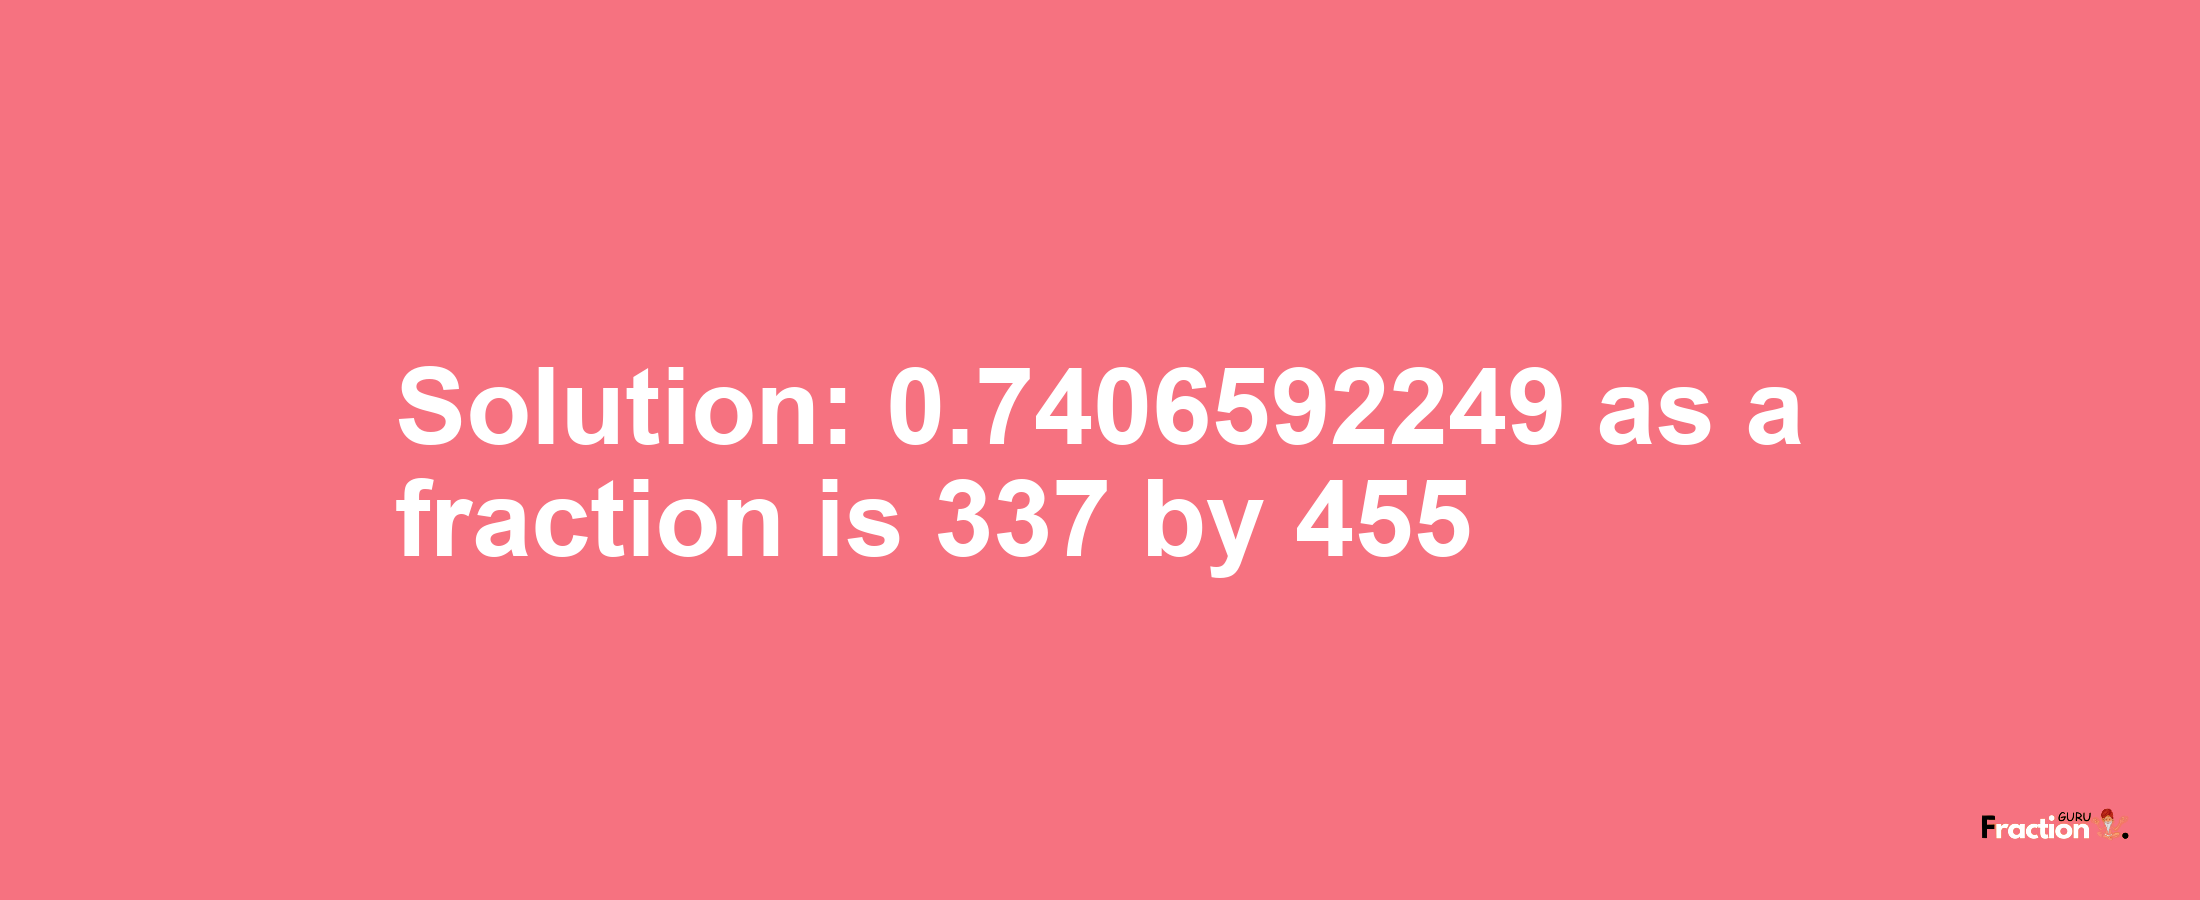 Solution:0.7406592249 as a fraction is 337/455